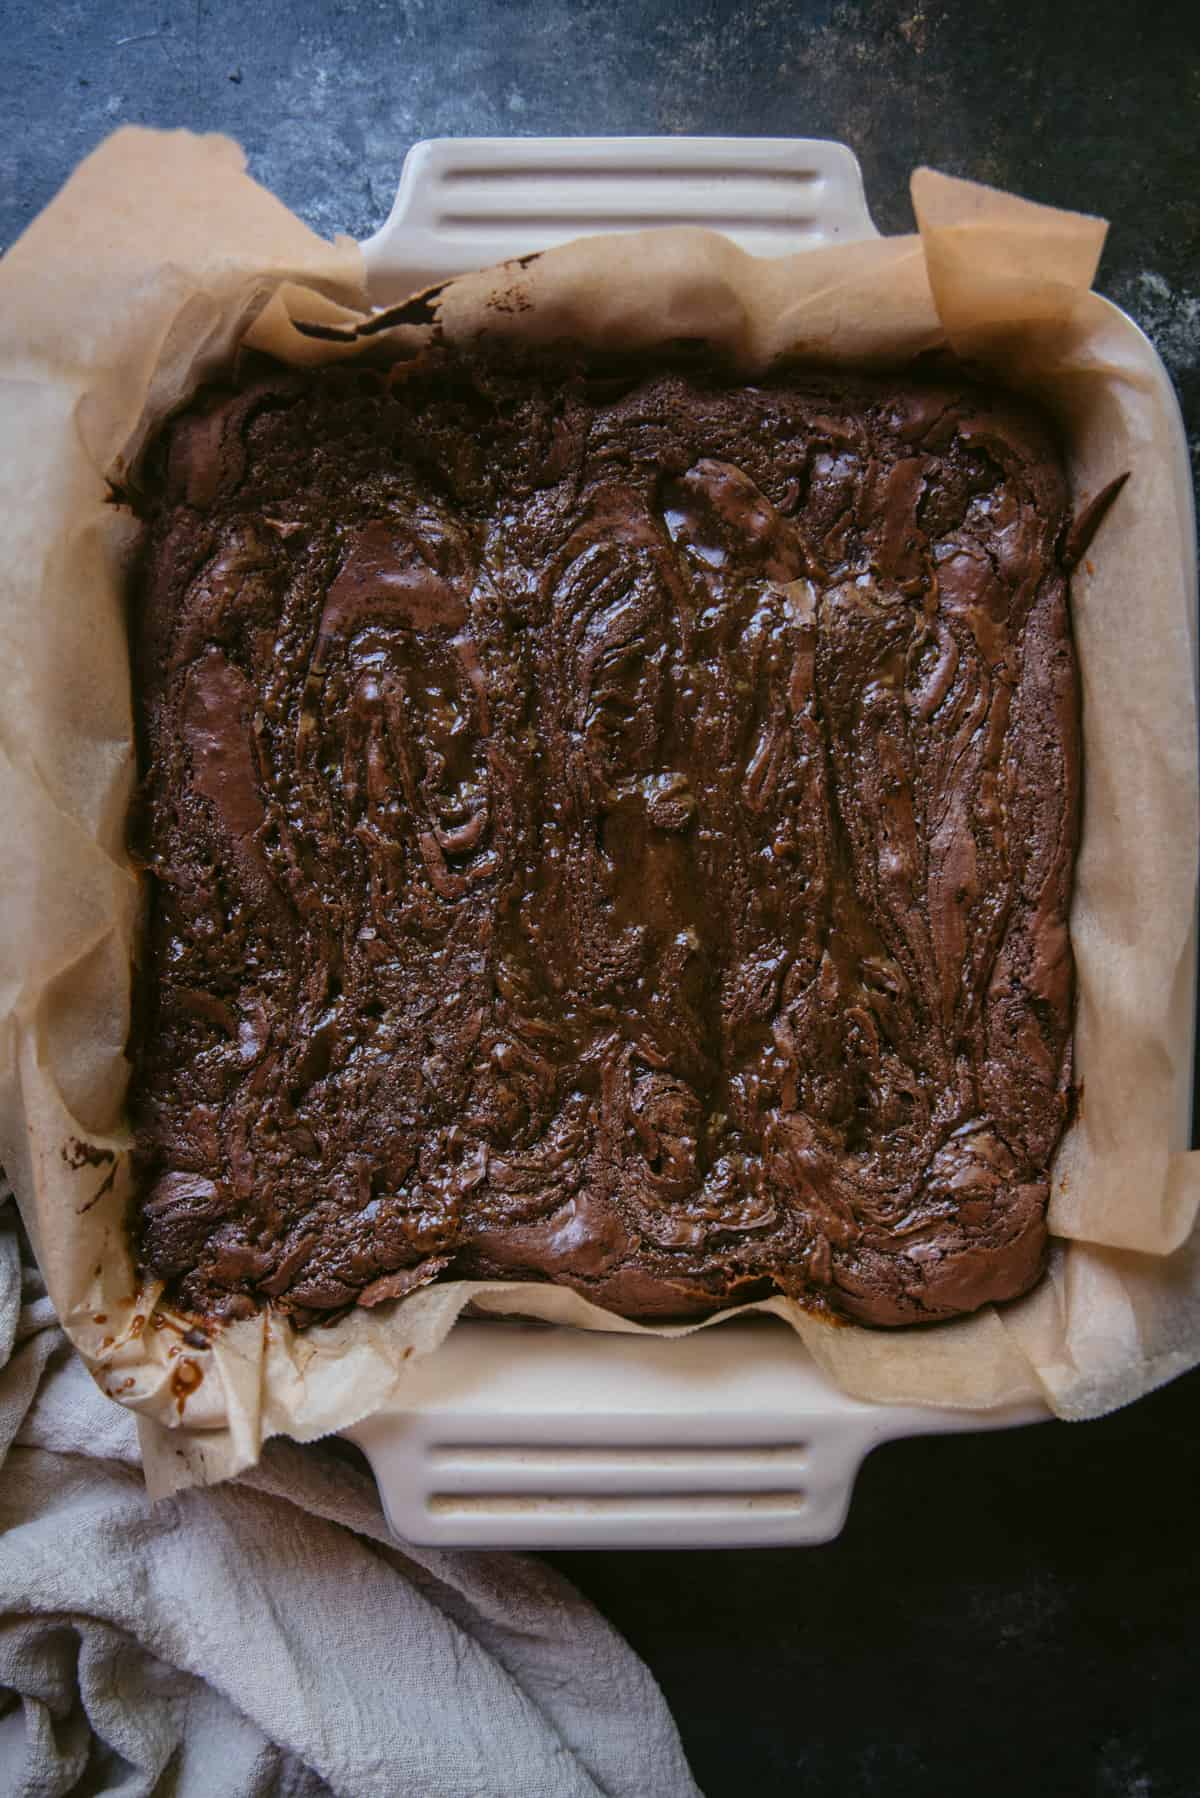 Overhead image of baked brownies in a ceramic 8x8 pan lined with parchment paper.  The brownies are crispy on top with swirls of salted caramel.